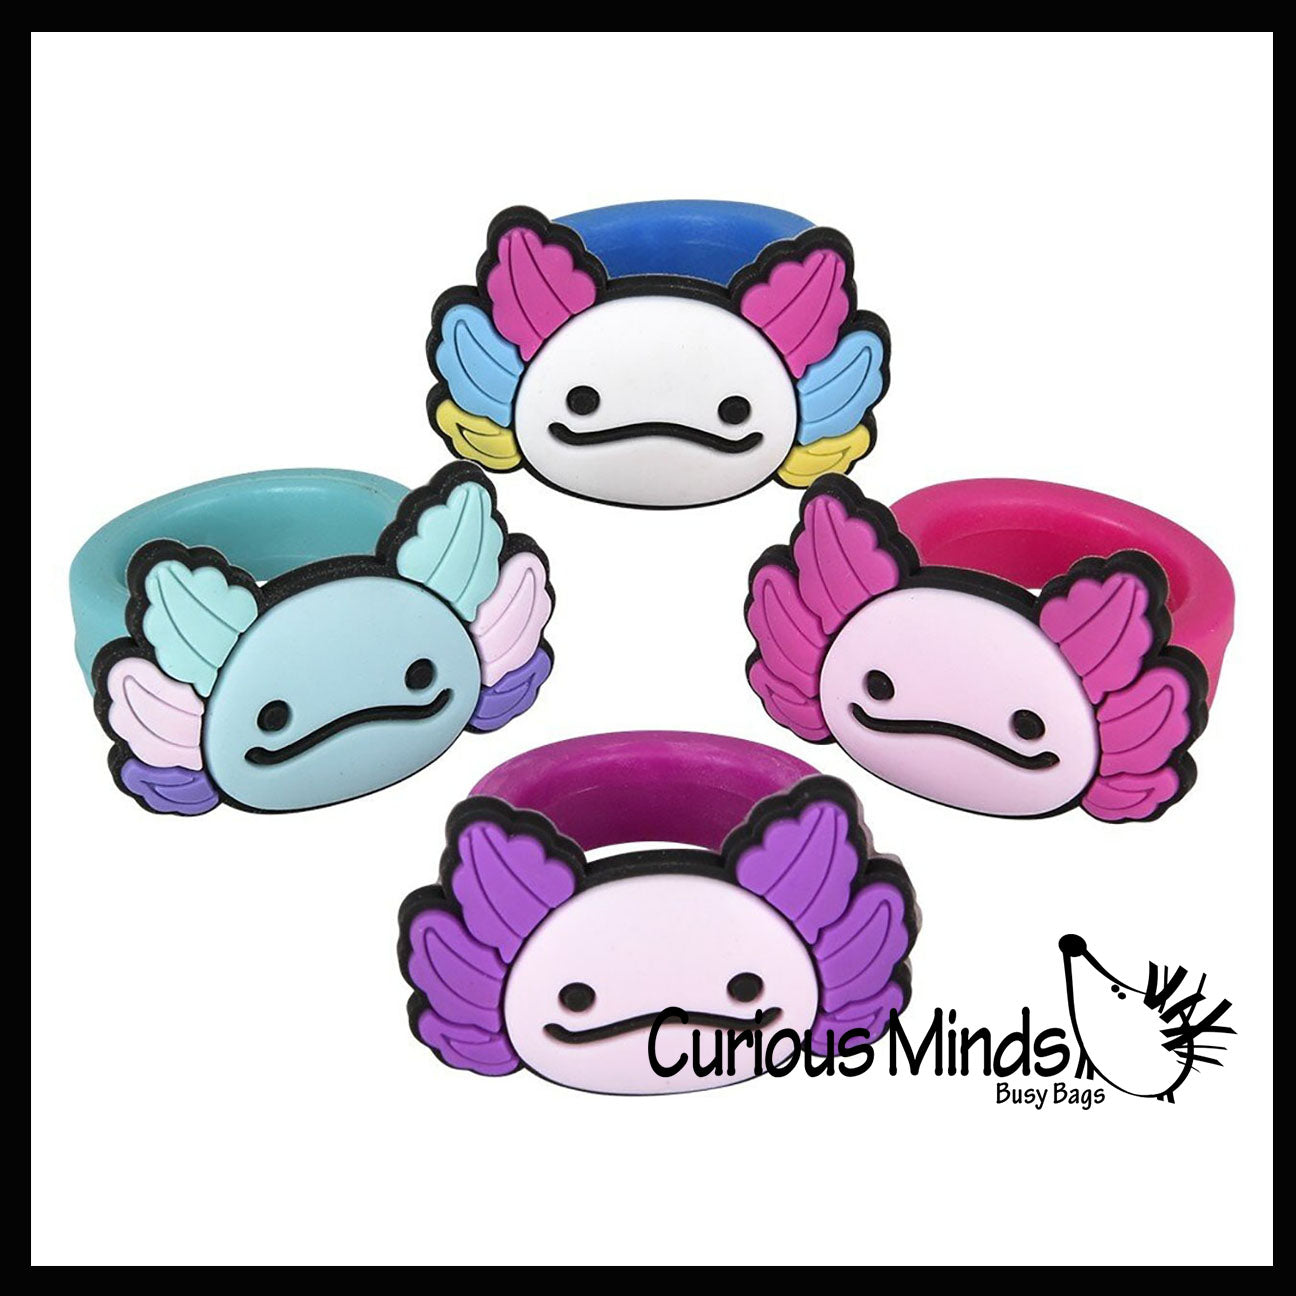 Axolotl Rings - Cute Plastic Charms Jewelry for Children - Ring Kids Party Favors All 4 Colors